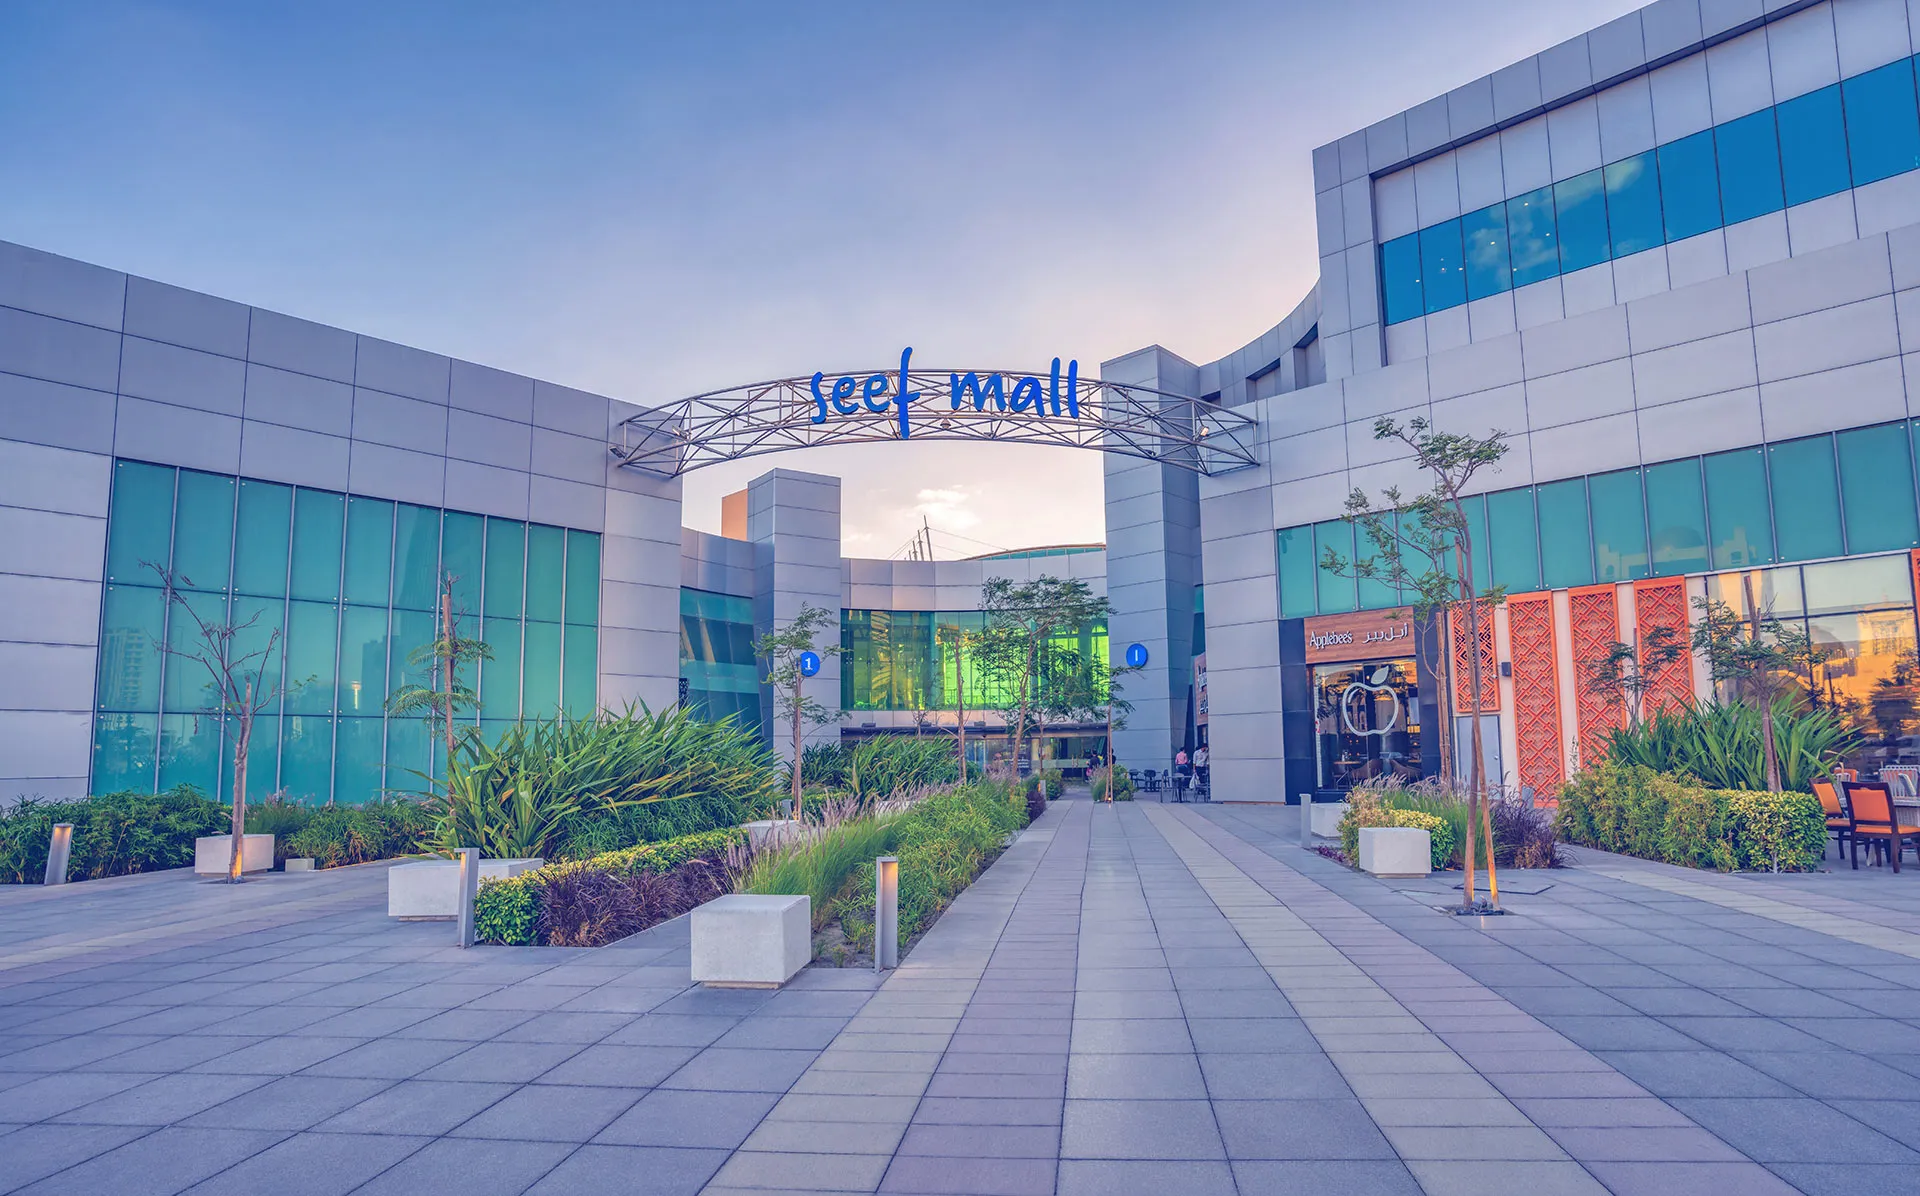 Seef Mall in Bahrain, middle_east | Fragrance,Handbags,Shoes,Clothes,Natural Beauty Products,Cosmetics,Sportswear,Jewelry - Country Helper